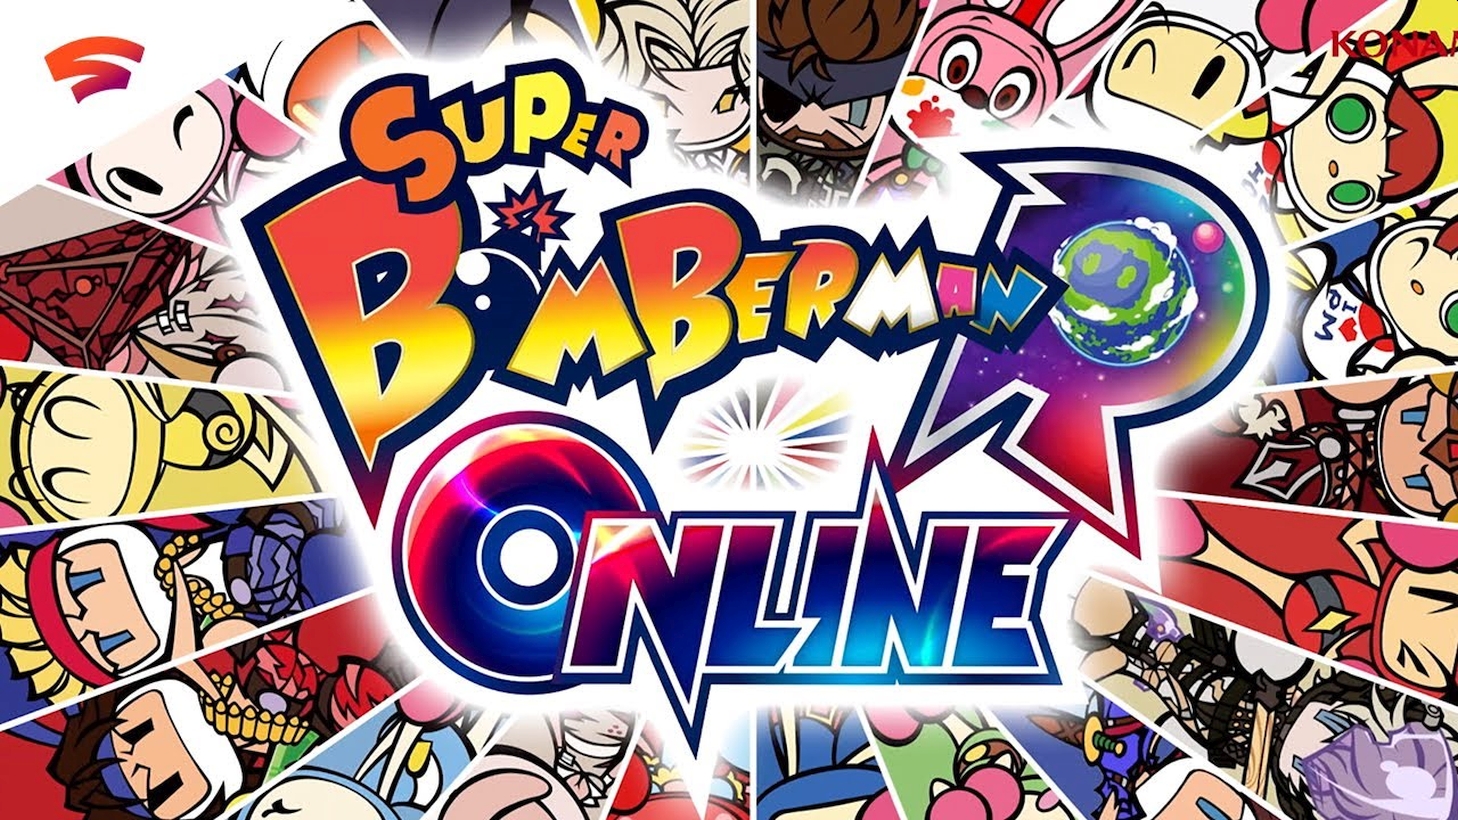 Super Bomberman R Online Launches With New Battle 64 Mode On Google Stadia This Fall